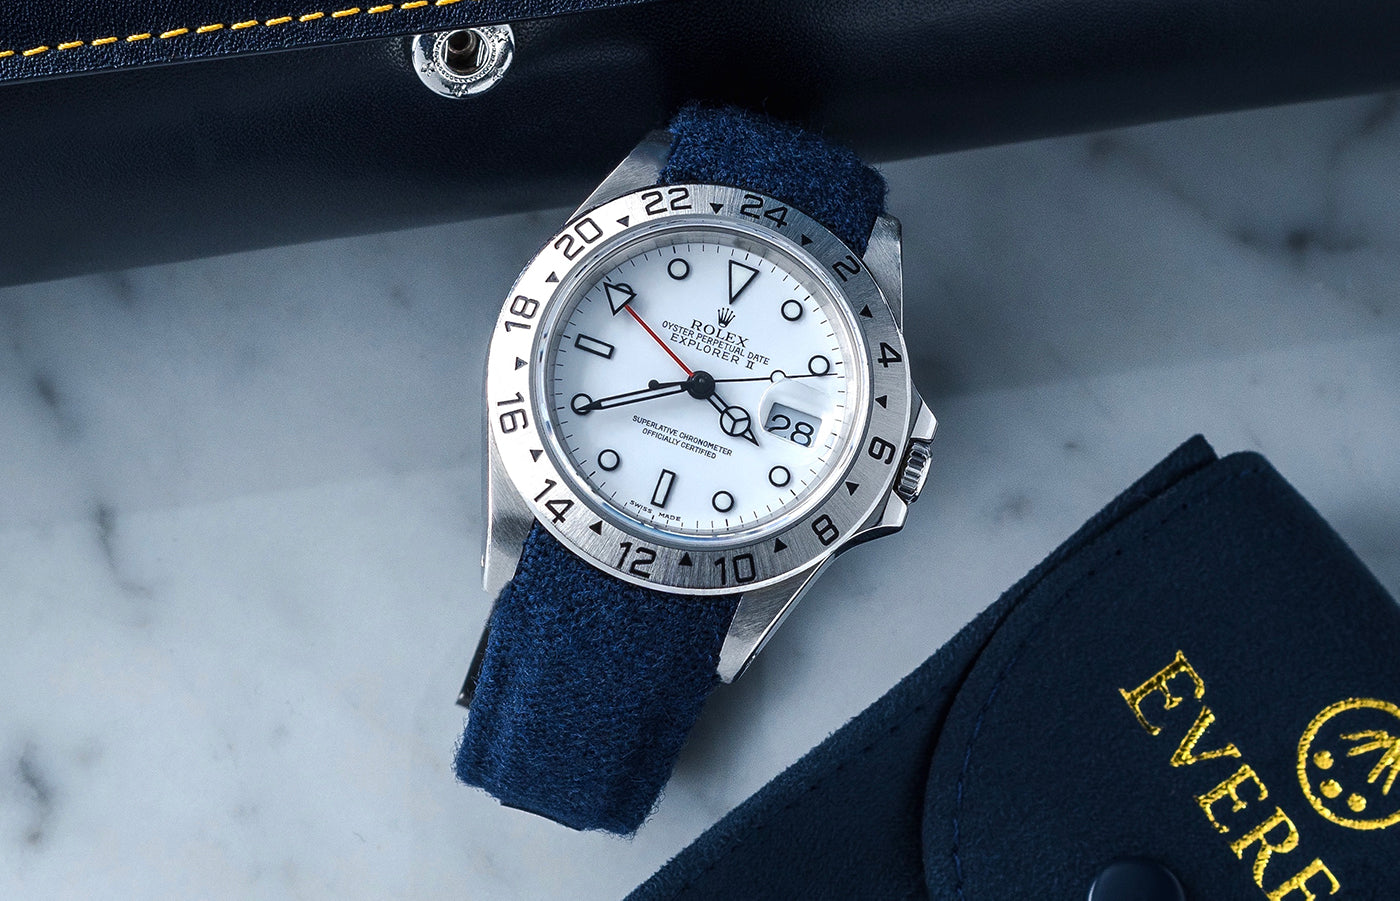 Everest Horology Products - #bluewatchmonday with the Rolex Yacht